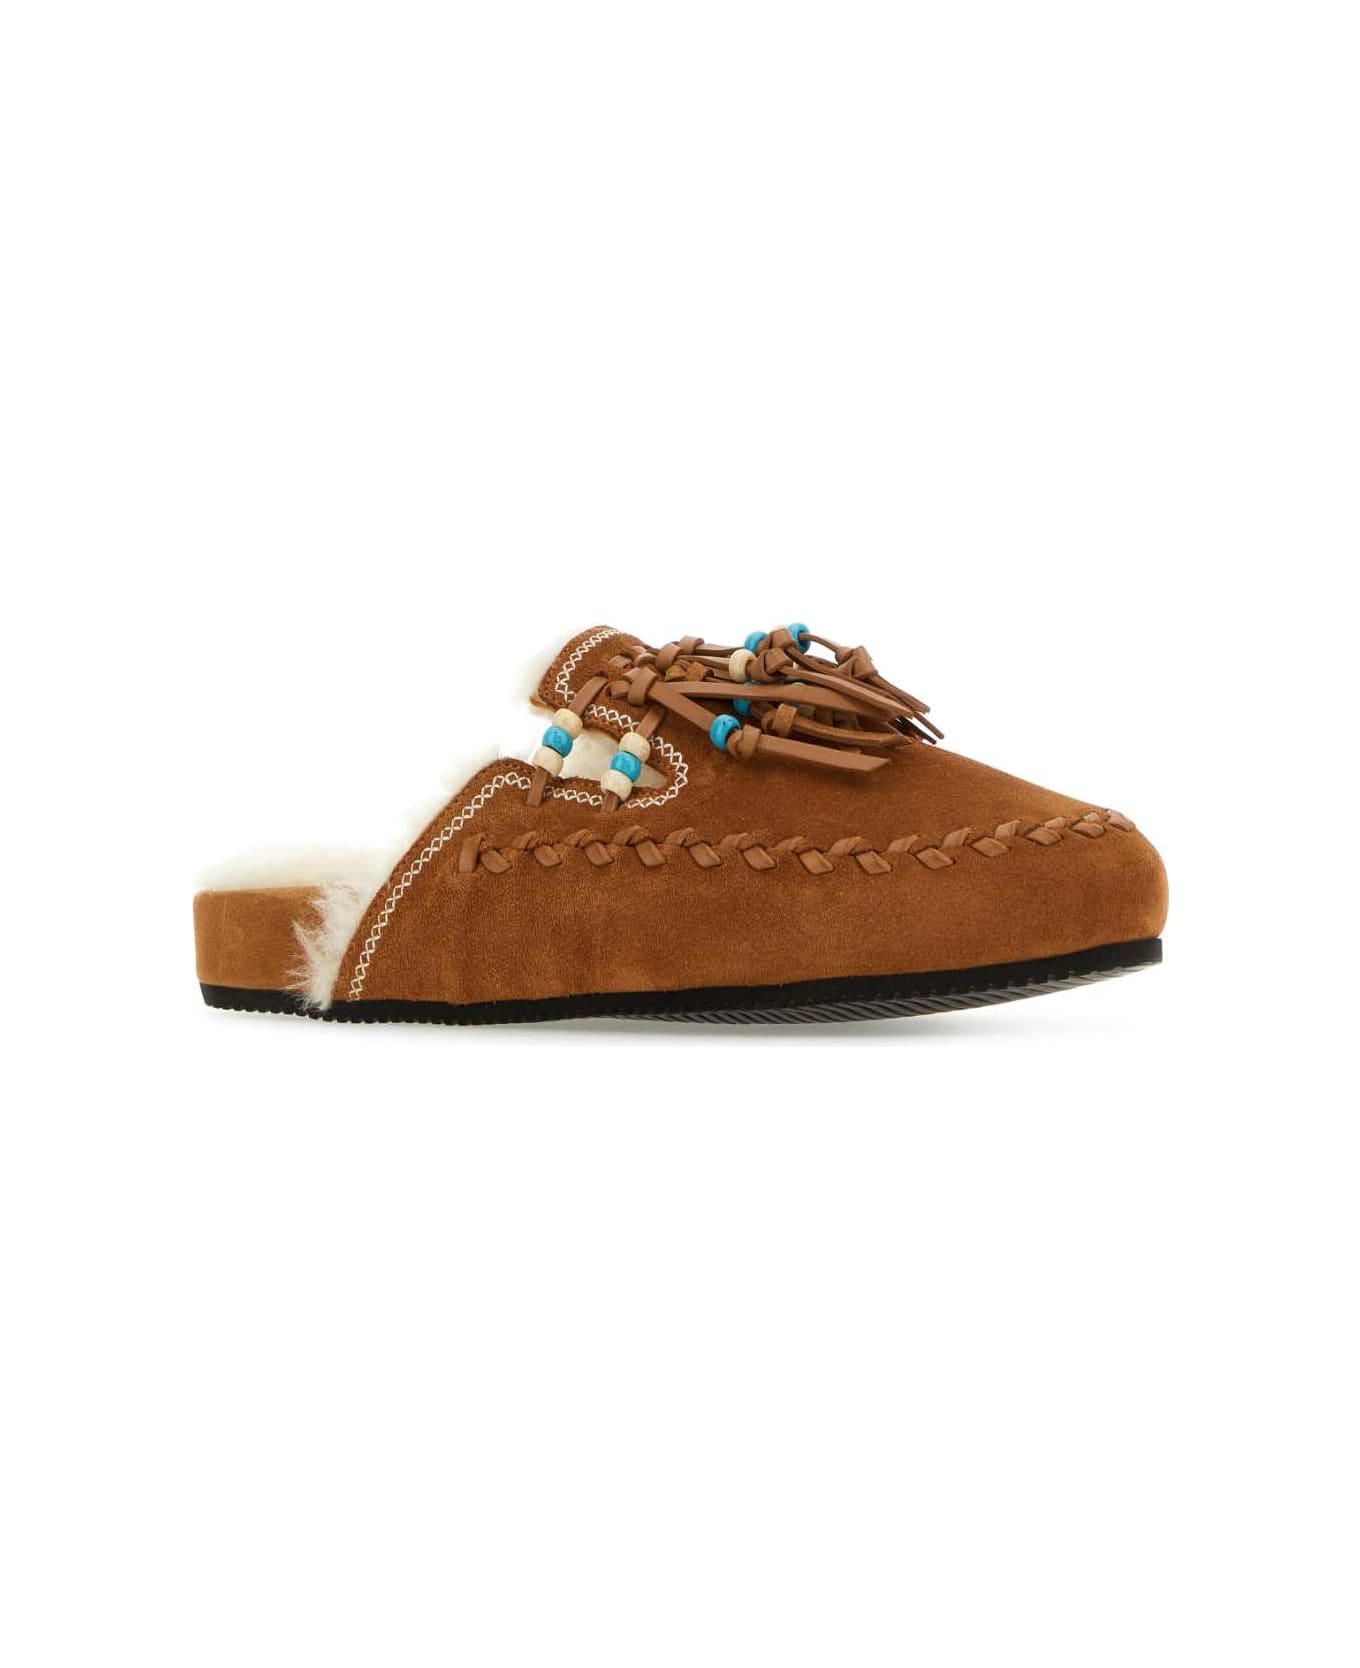 Alanui Brown Suede Leather The Journey Slippers - 6400